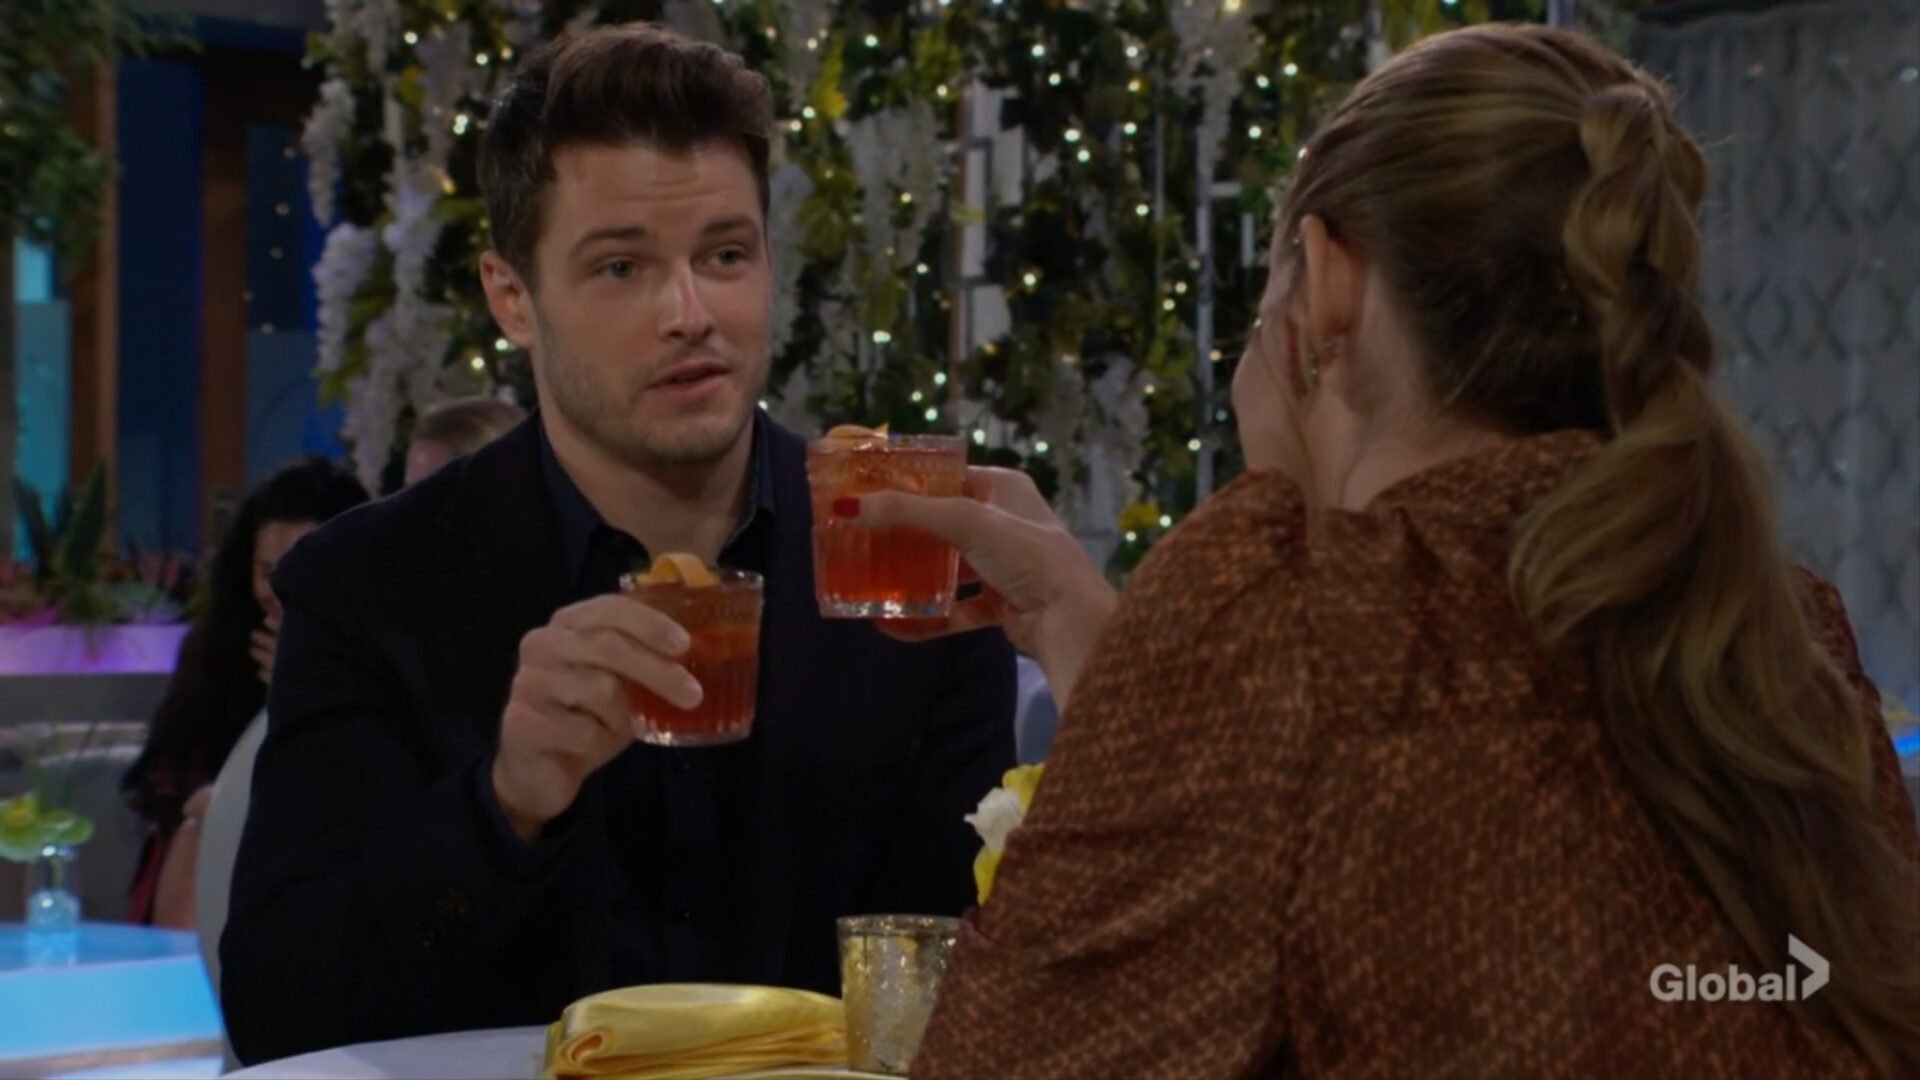 kyle and summer date drinks young restless